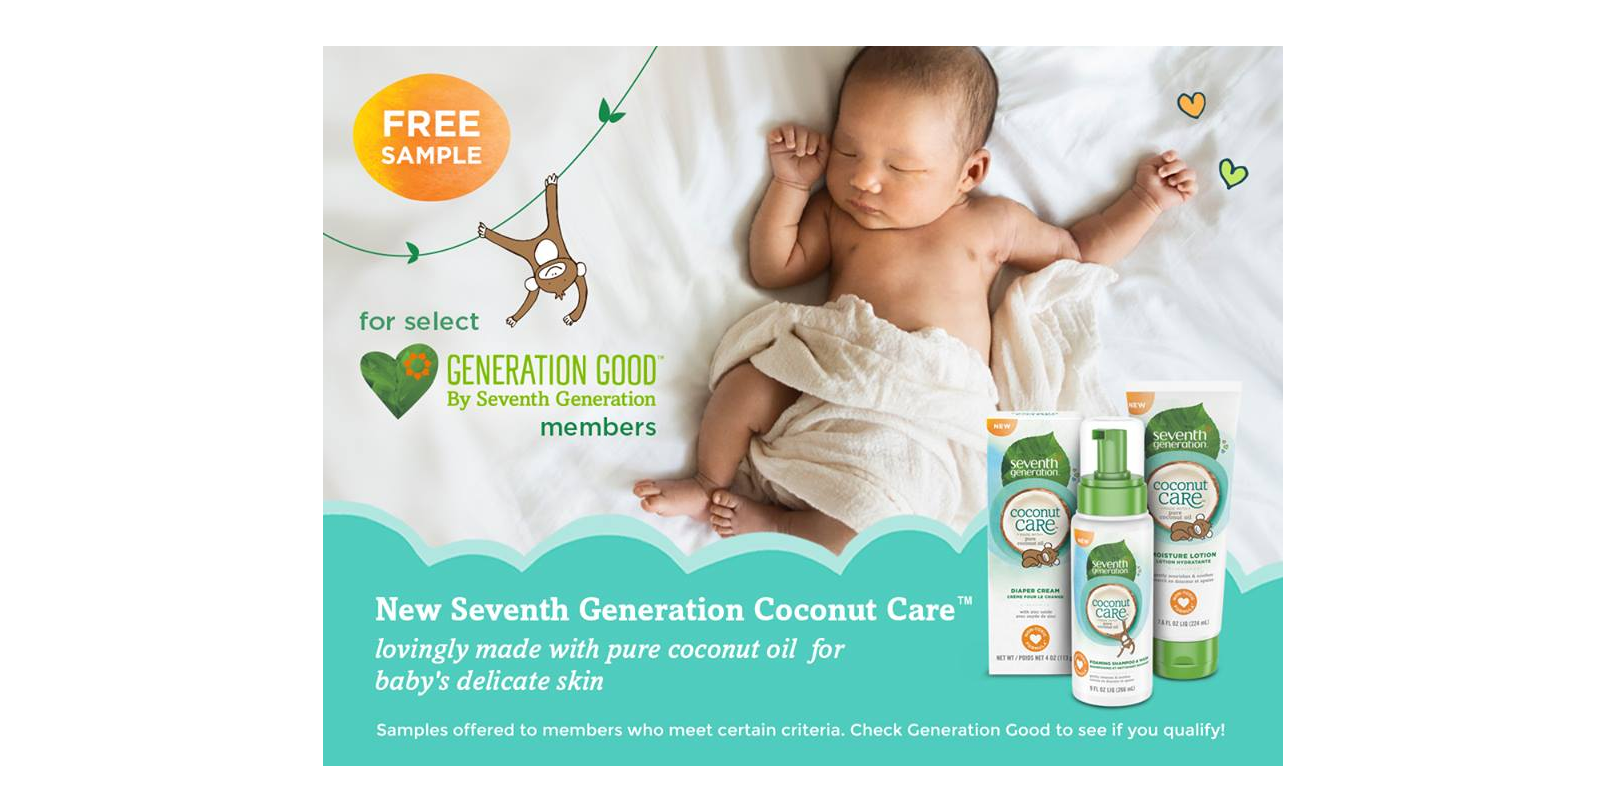 FREE Sample of Seventh Generation Coconut Care!!